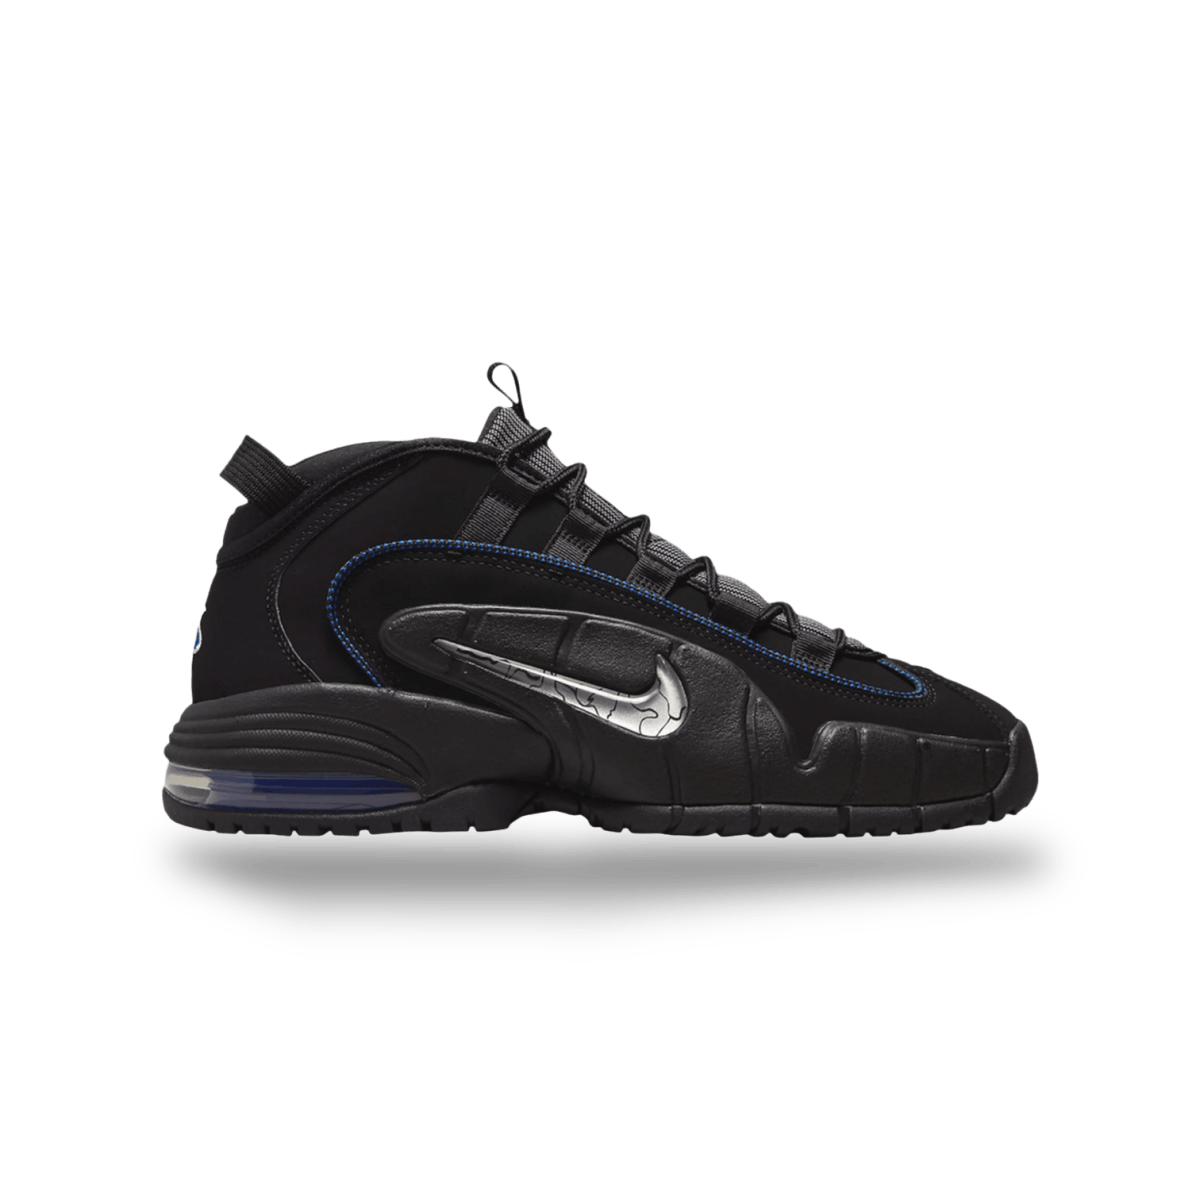 Air Max Penny 1 Game Royal - Grade School - Mid Sneaker - Nike - Jawns on Fire - sneakers